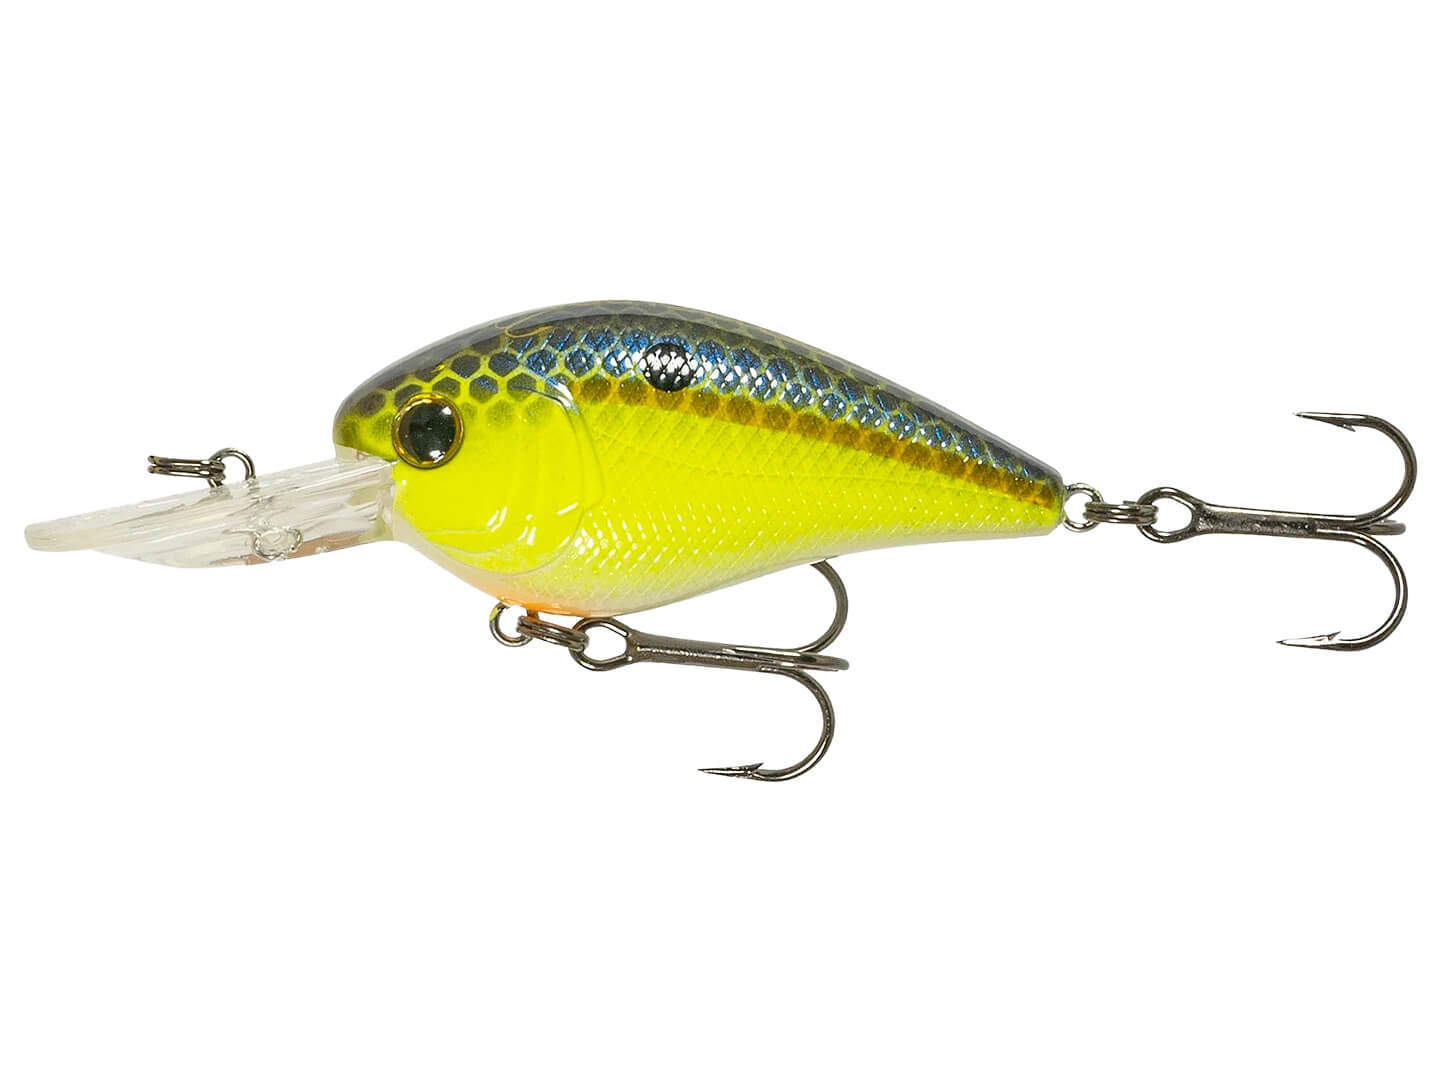 6th Sense Crush Mini 25MD Sexified Chartreuse Shad